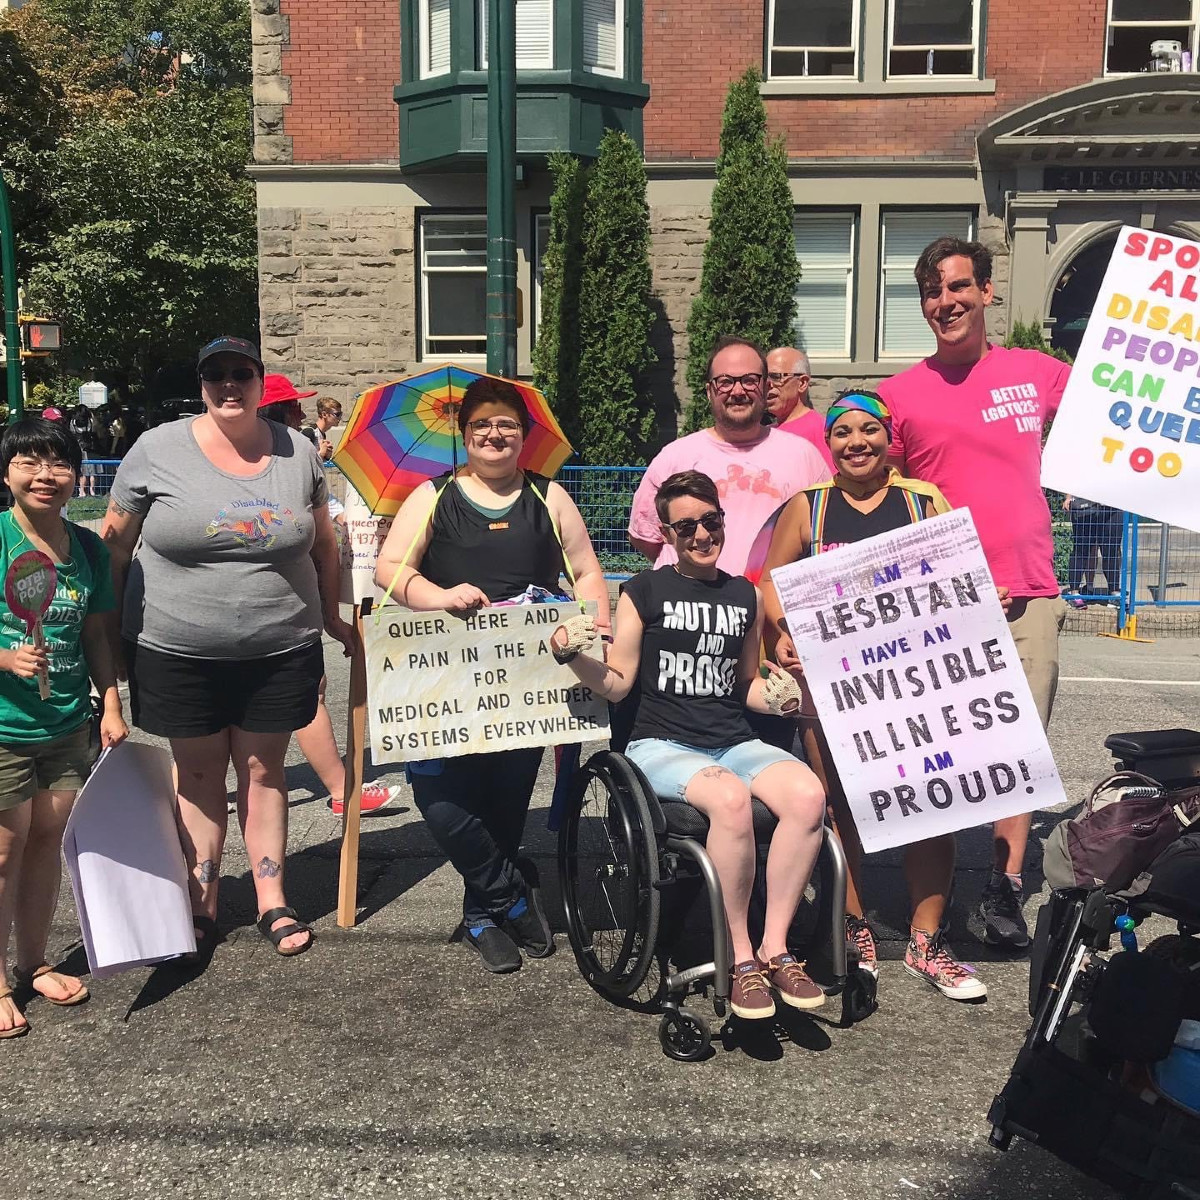 A group of people gather near Davie Street at Vancouver Pride, holding placards. One says, ‘Queer, Here, and a Pain in the Ass for Gender and Medical Systems Everywhere,’ and another says, ‘I Am a Lesbian. I Have an Invisible Illness. And I am Proud.’